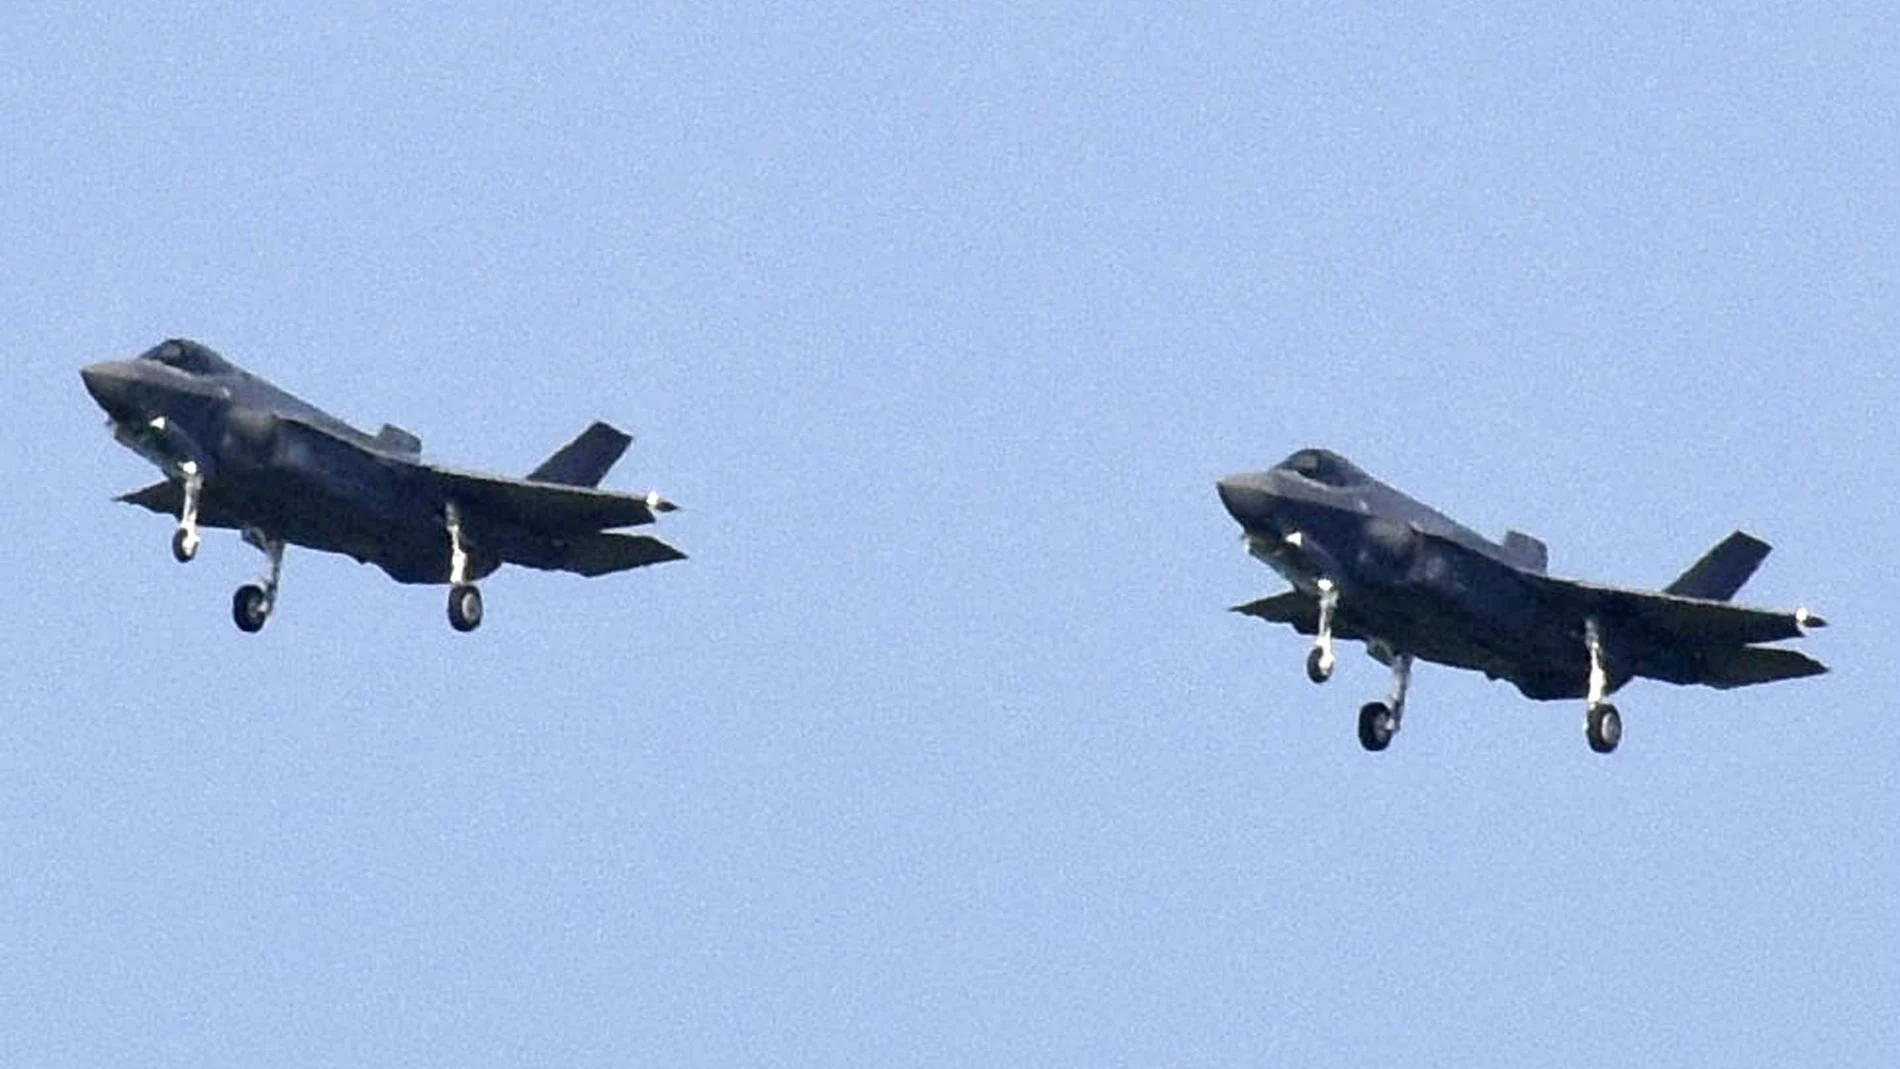 FILE - In this Aug. 1, 2019, file photo, Japanese Air Self-Defense Force's F-35A stealth fighter jets prepare to land at Misawa Air Base in Misawa, northern Japan. Japan's Defense Ministry is seeking a record-high budget of nearly 5.5 trillion yen ($55 billion) for fiscal 2021 fund more purchases of costly American stealth fighters and expand its capability to counter possible threats in both cyber and outer space.(Kyodo News via AP, File)